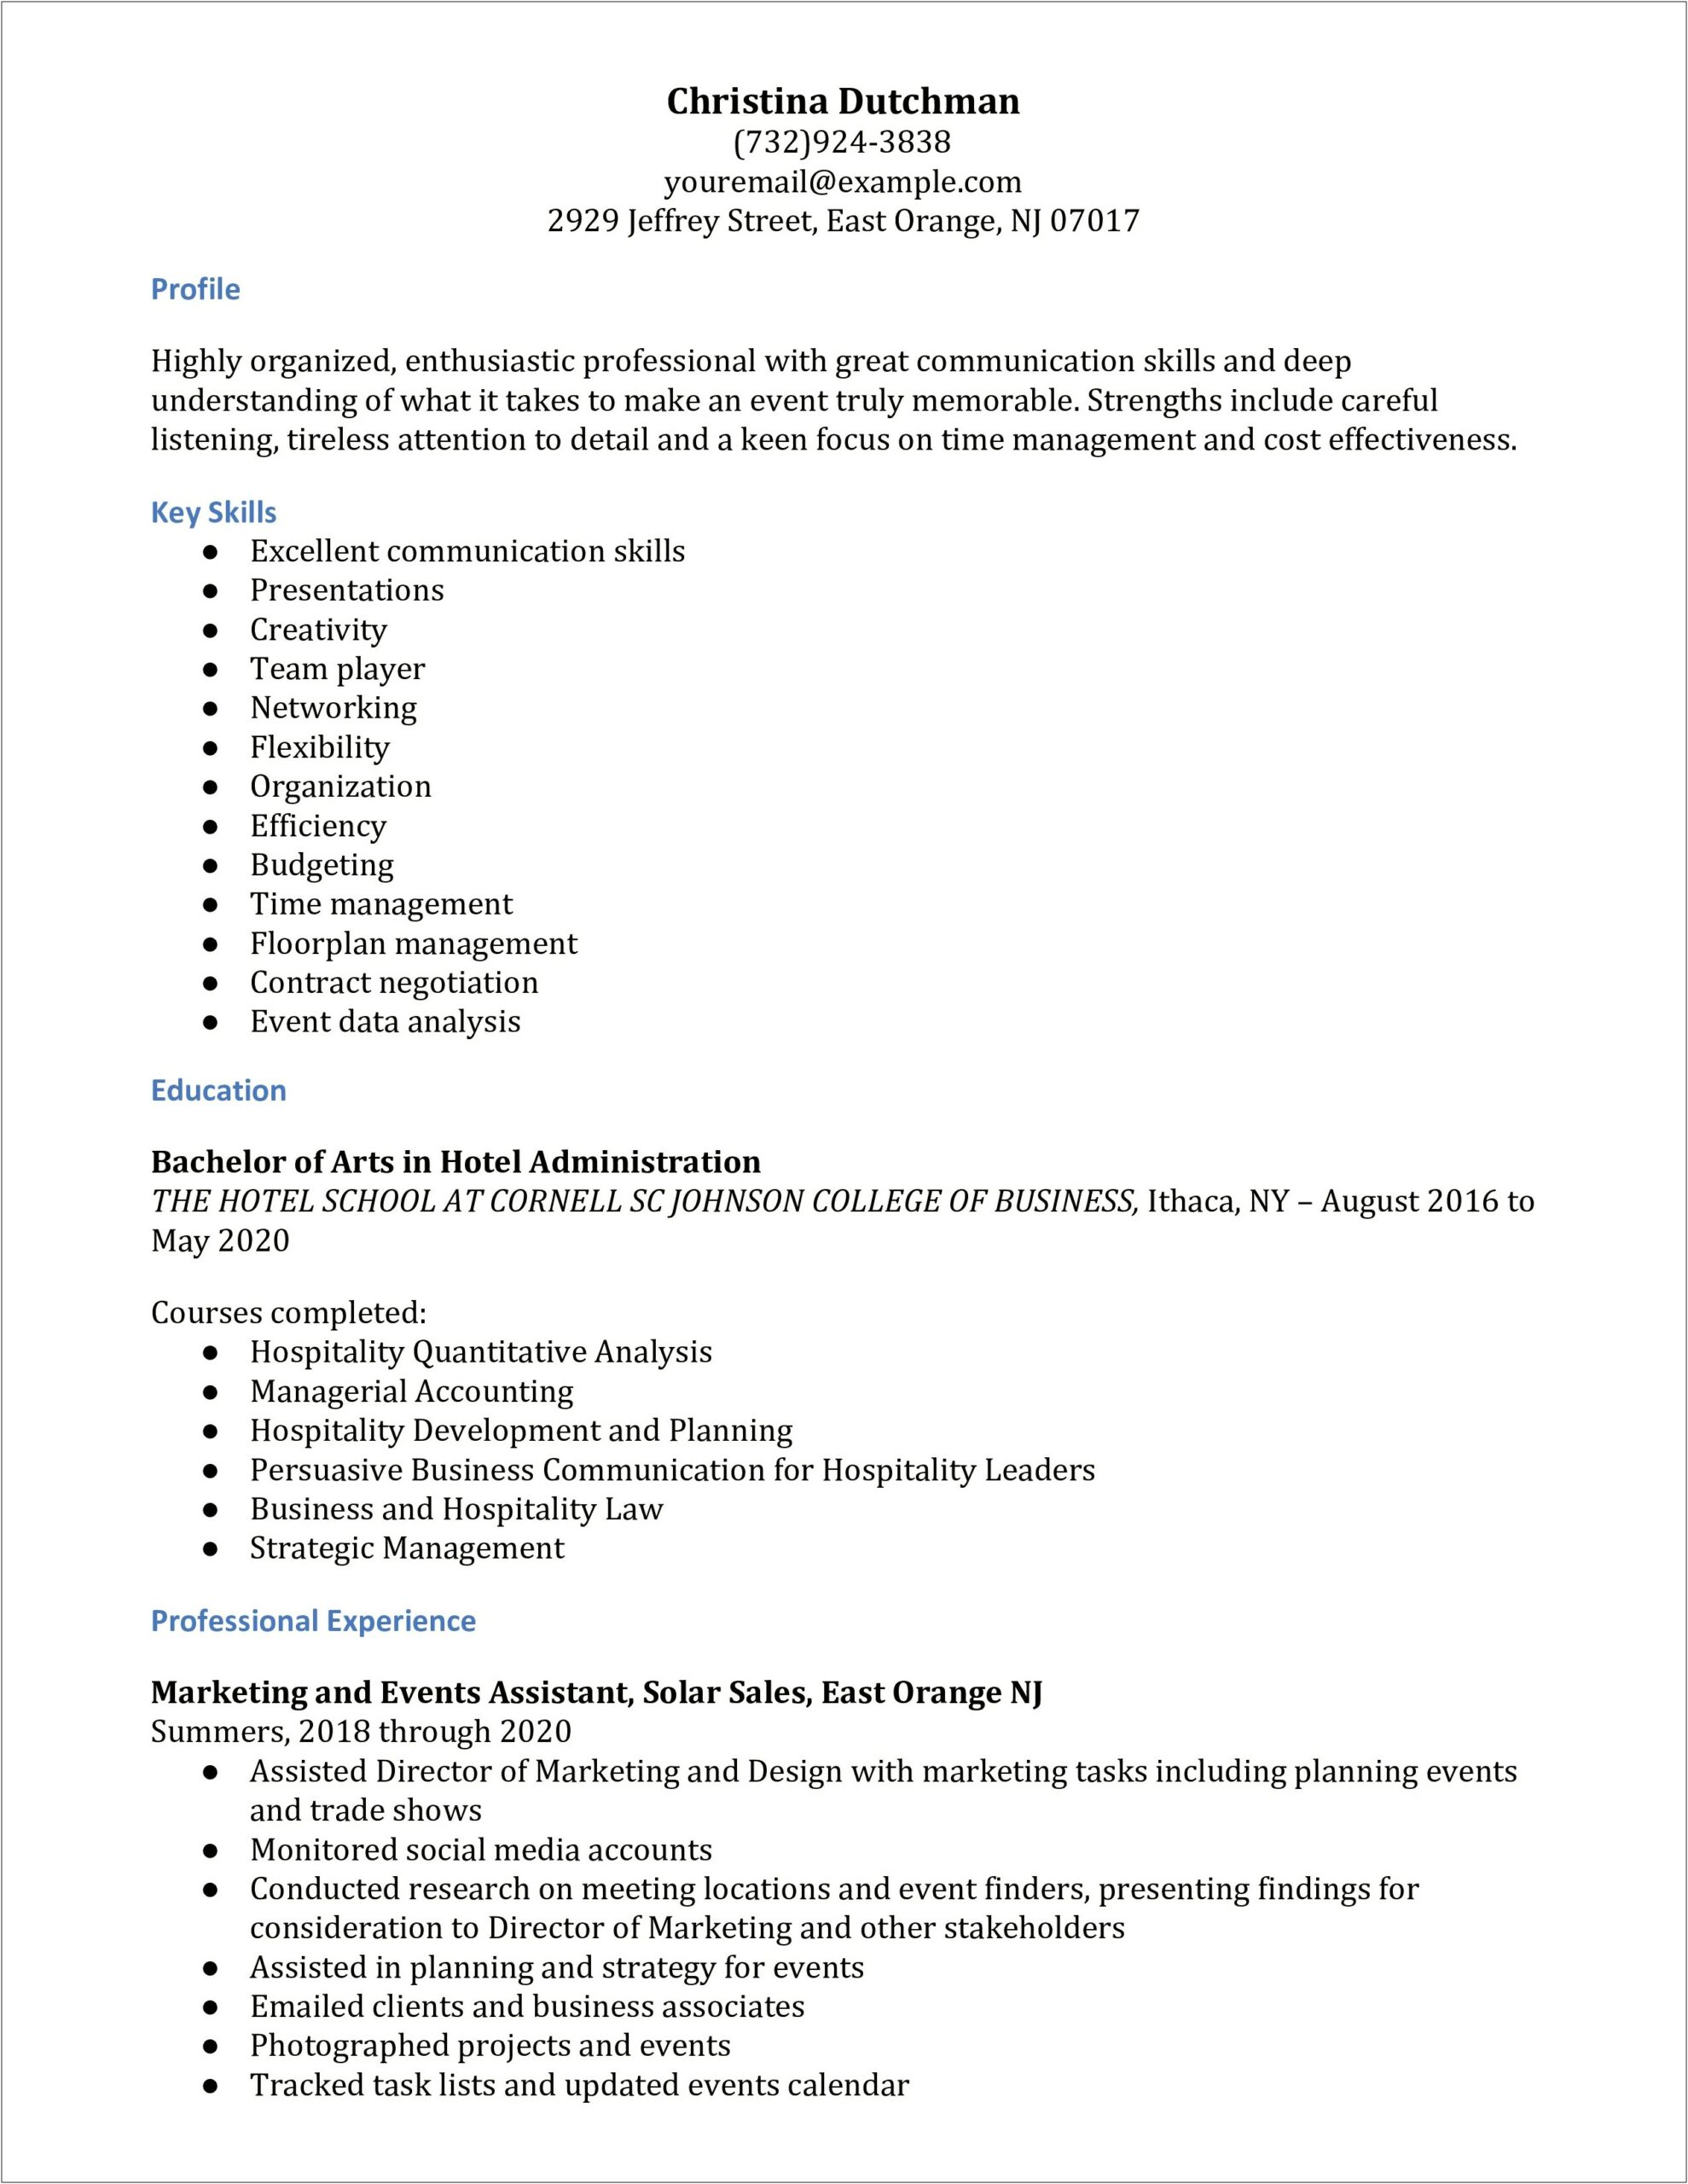 Resume Examples For Meeting Planners